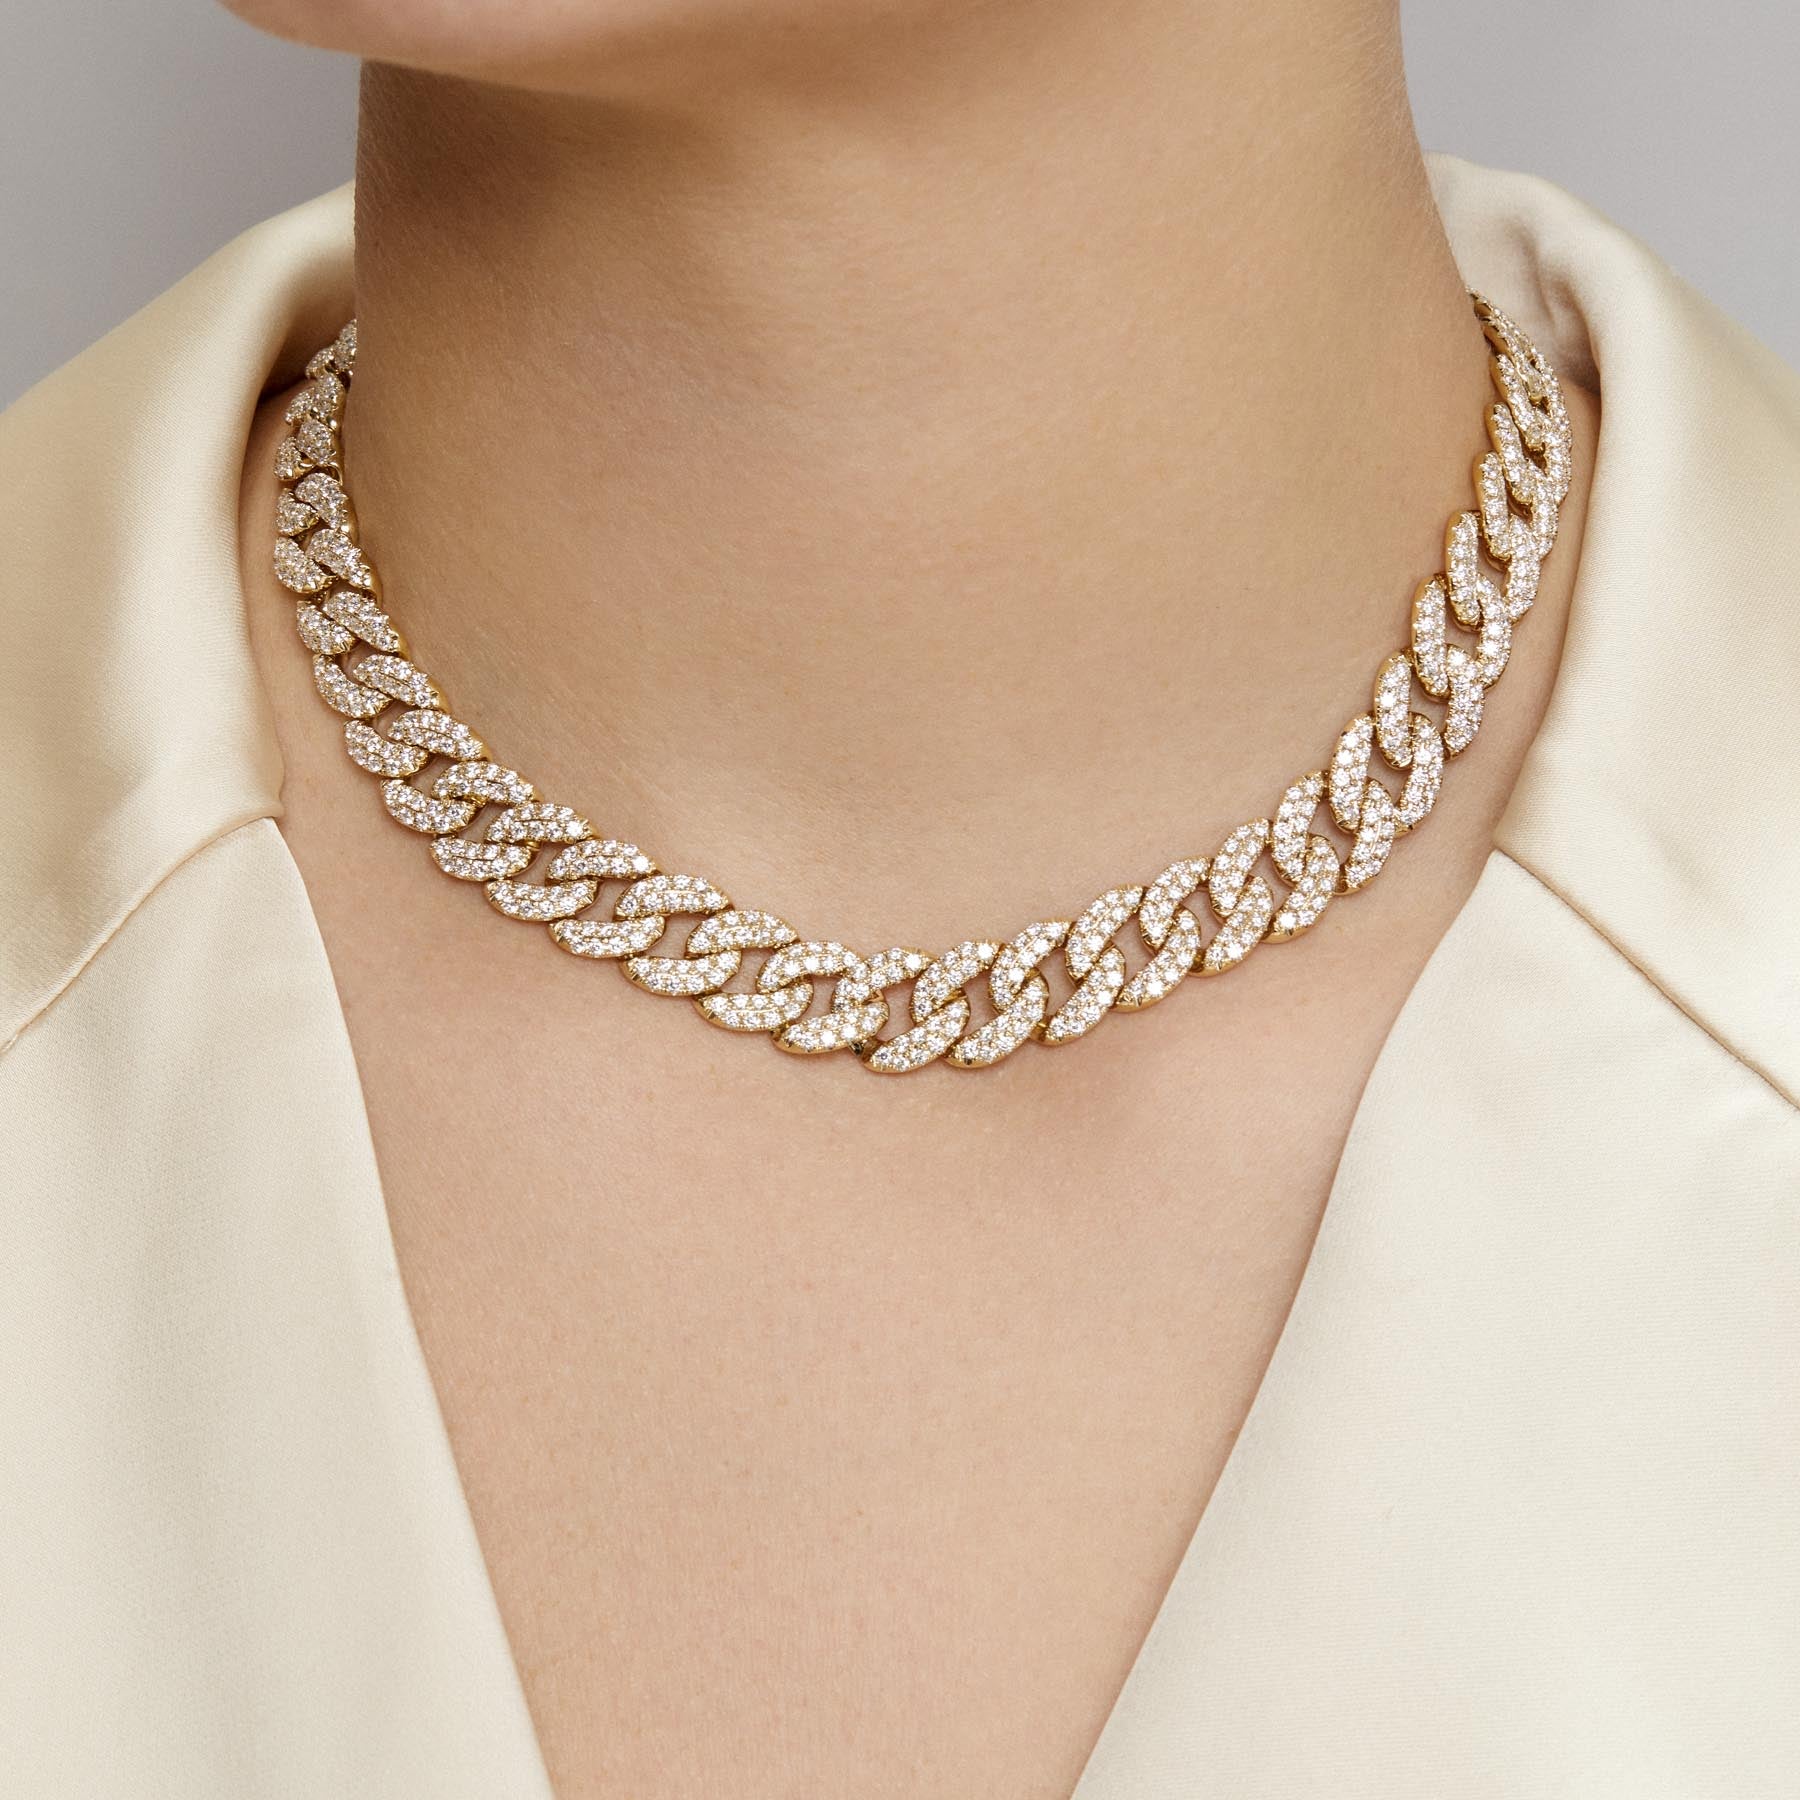 14KT Yellow Gold Diamond Luxe Carter Chain Link Necklace